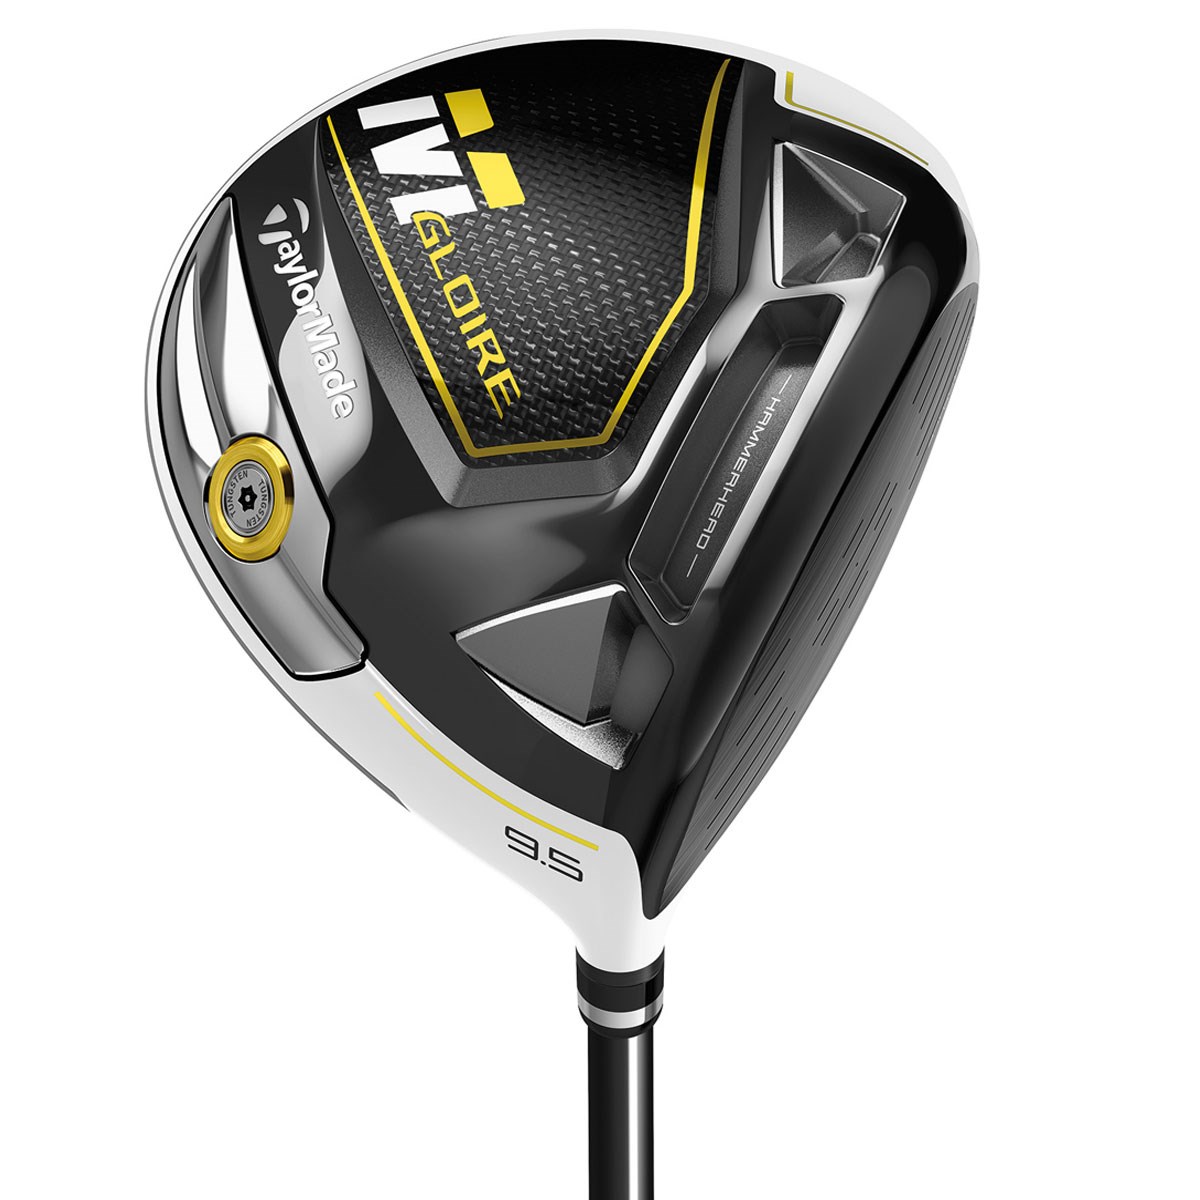 Taylormade Serial Number